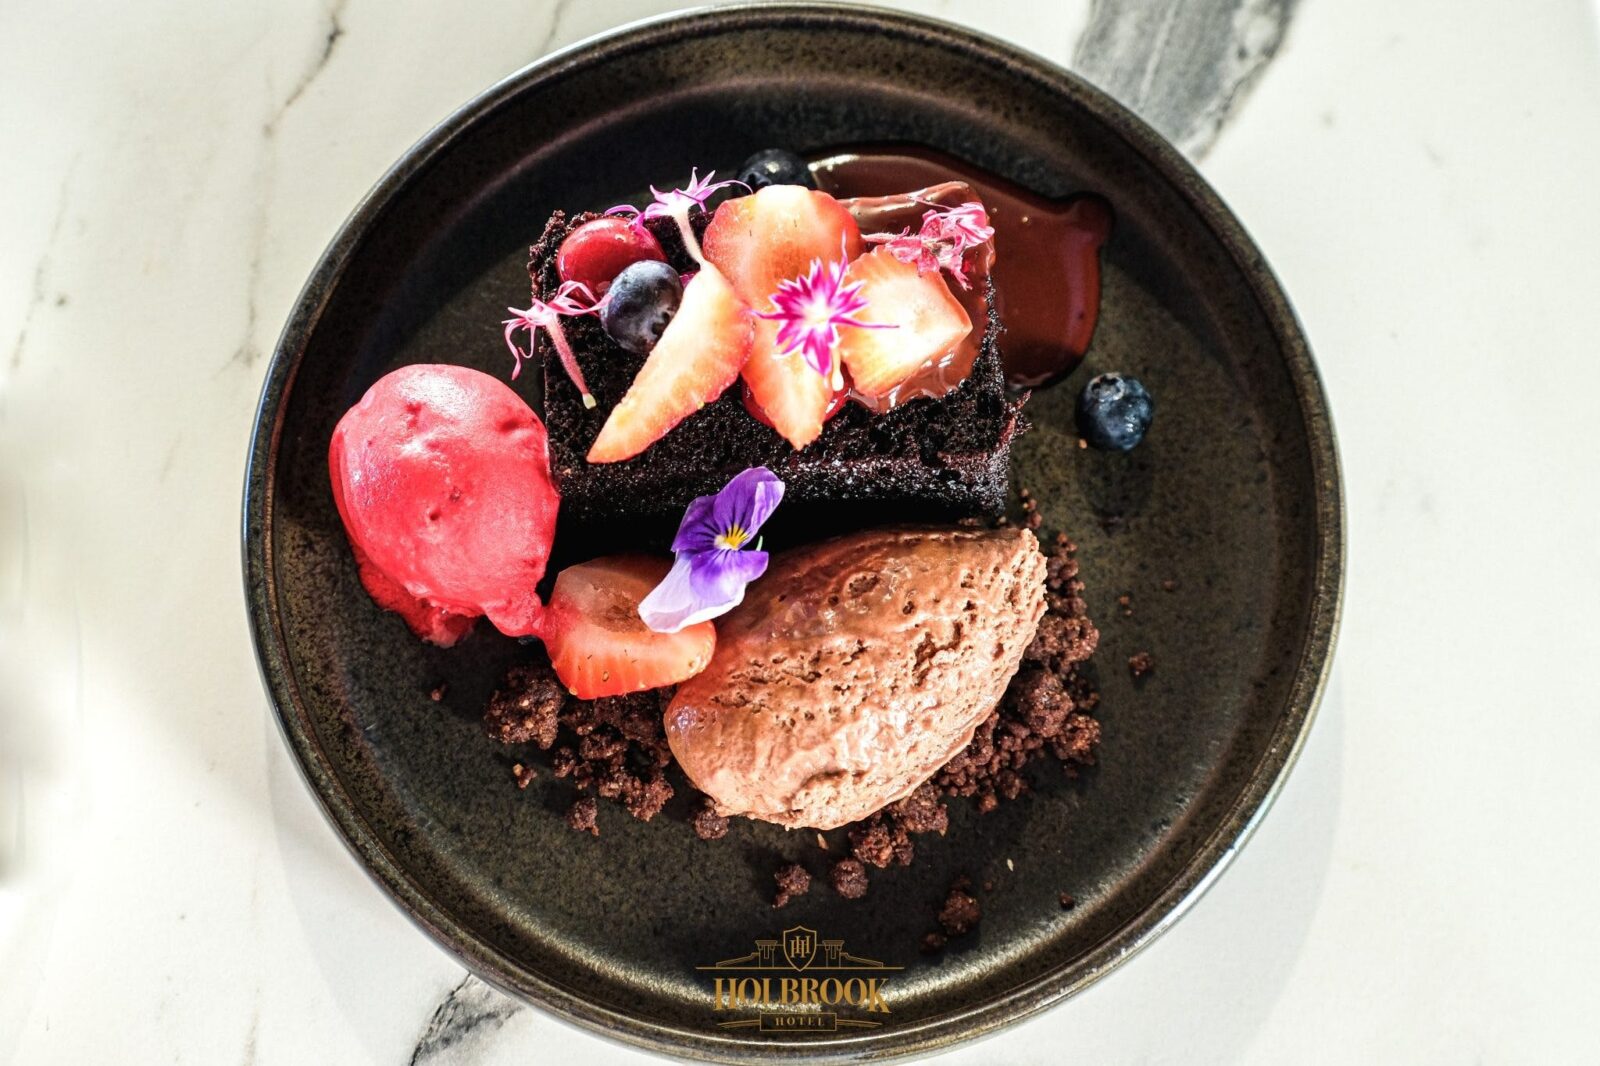 Chocolate Dessert with fresh fruit and edible flowers